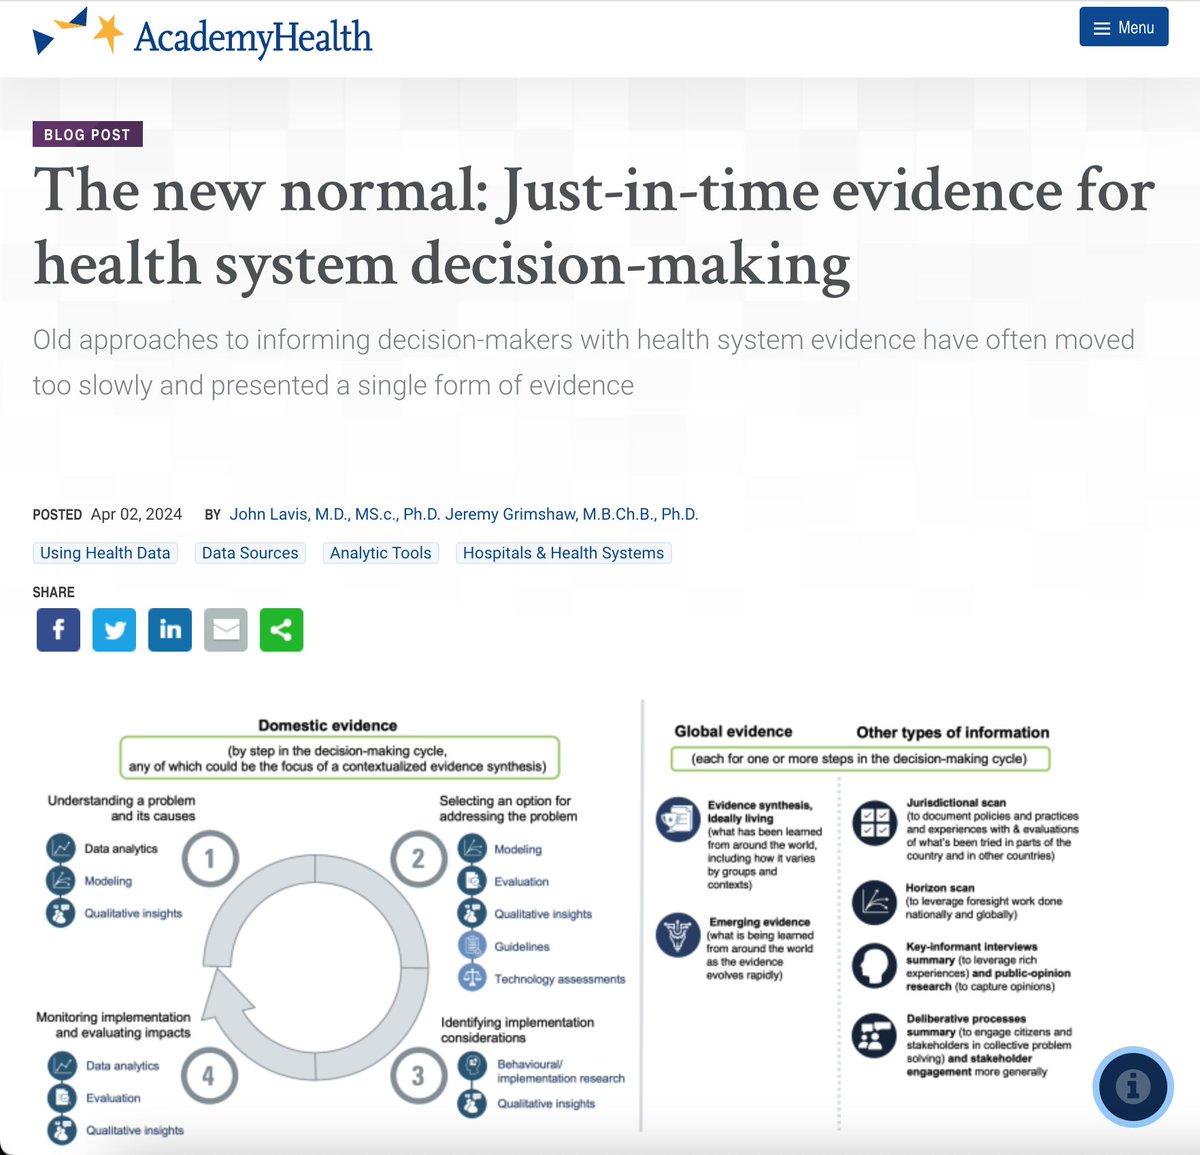 In the past three years, we’ve seen remarkable efforts to better meet decision makers’ demands for the best evidence under tight timelines. Read more in this @AcademyHealth blog post by @EvidenceComm secretariat co-leads @lavisjn & @GrimshawJeremy ow.ly/NpOC50R8mGU